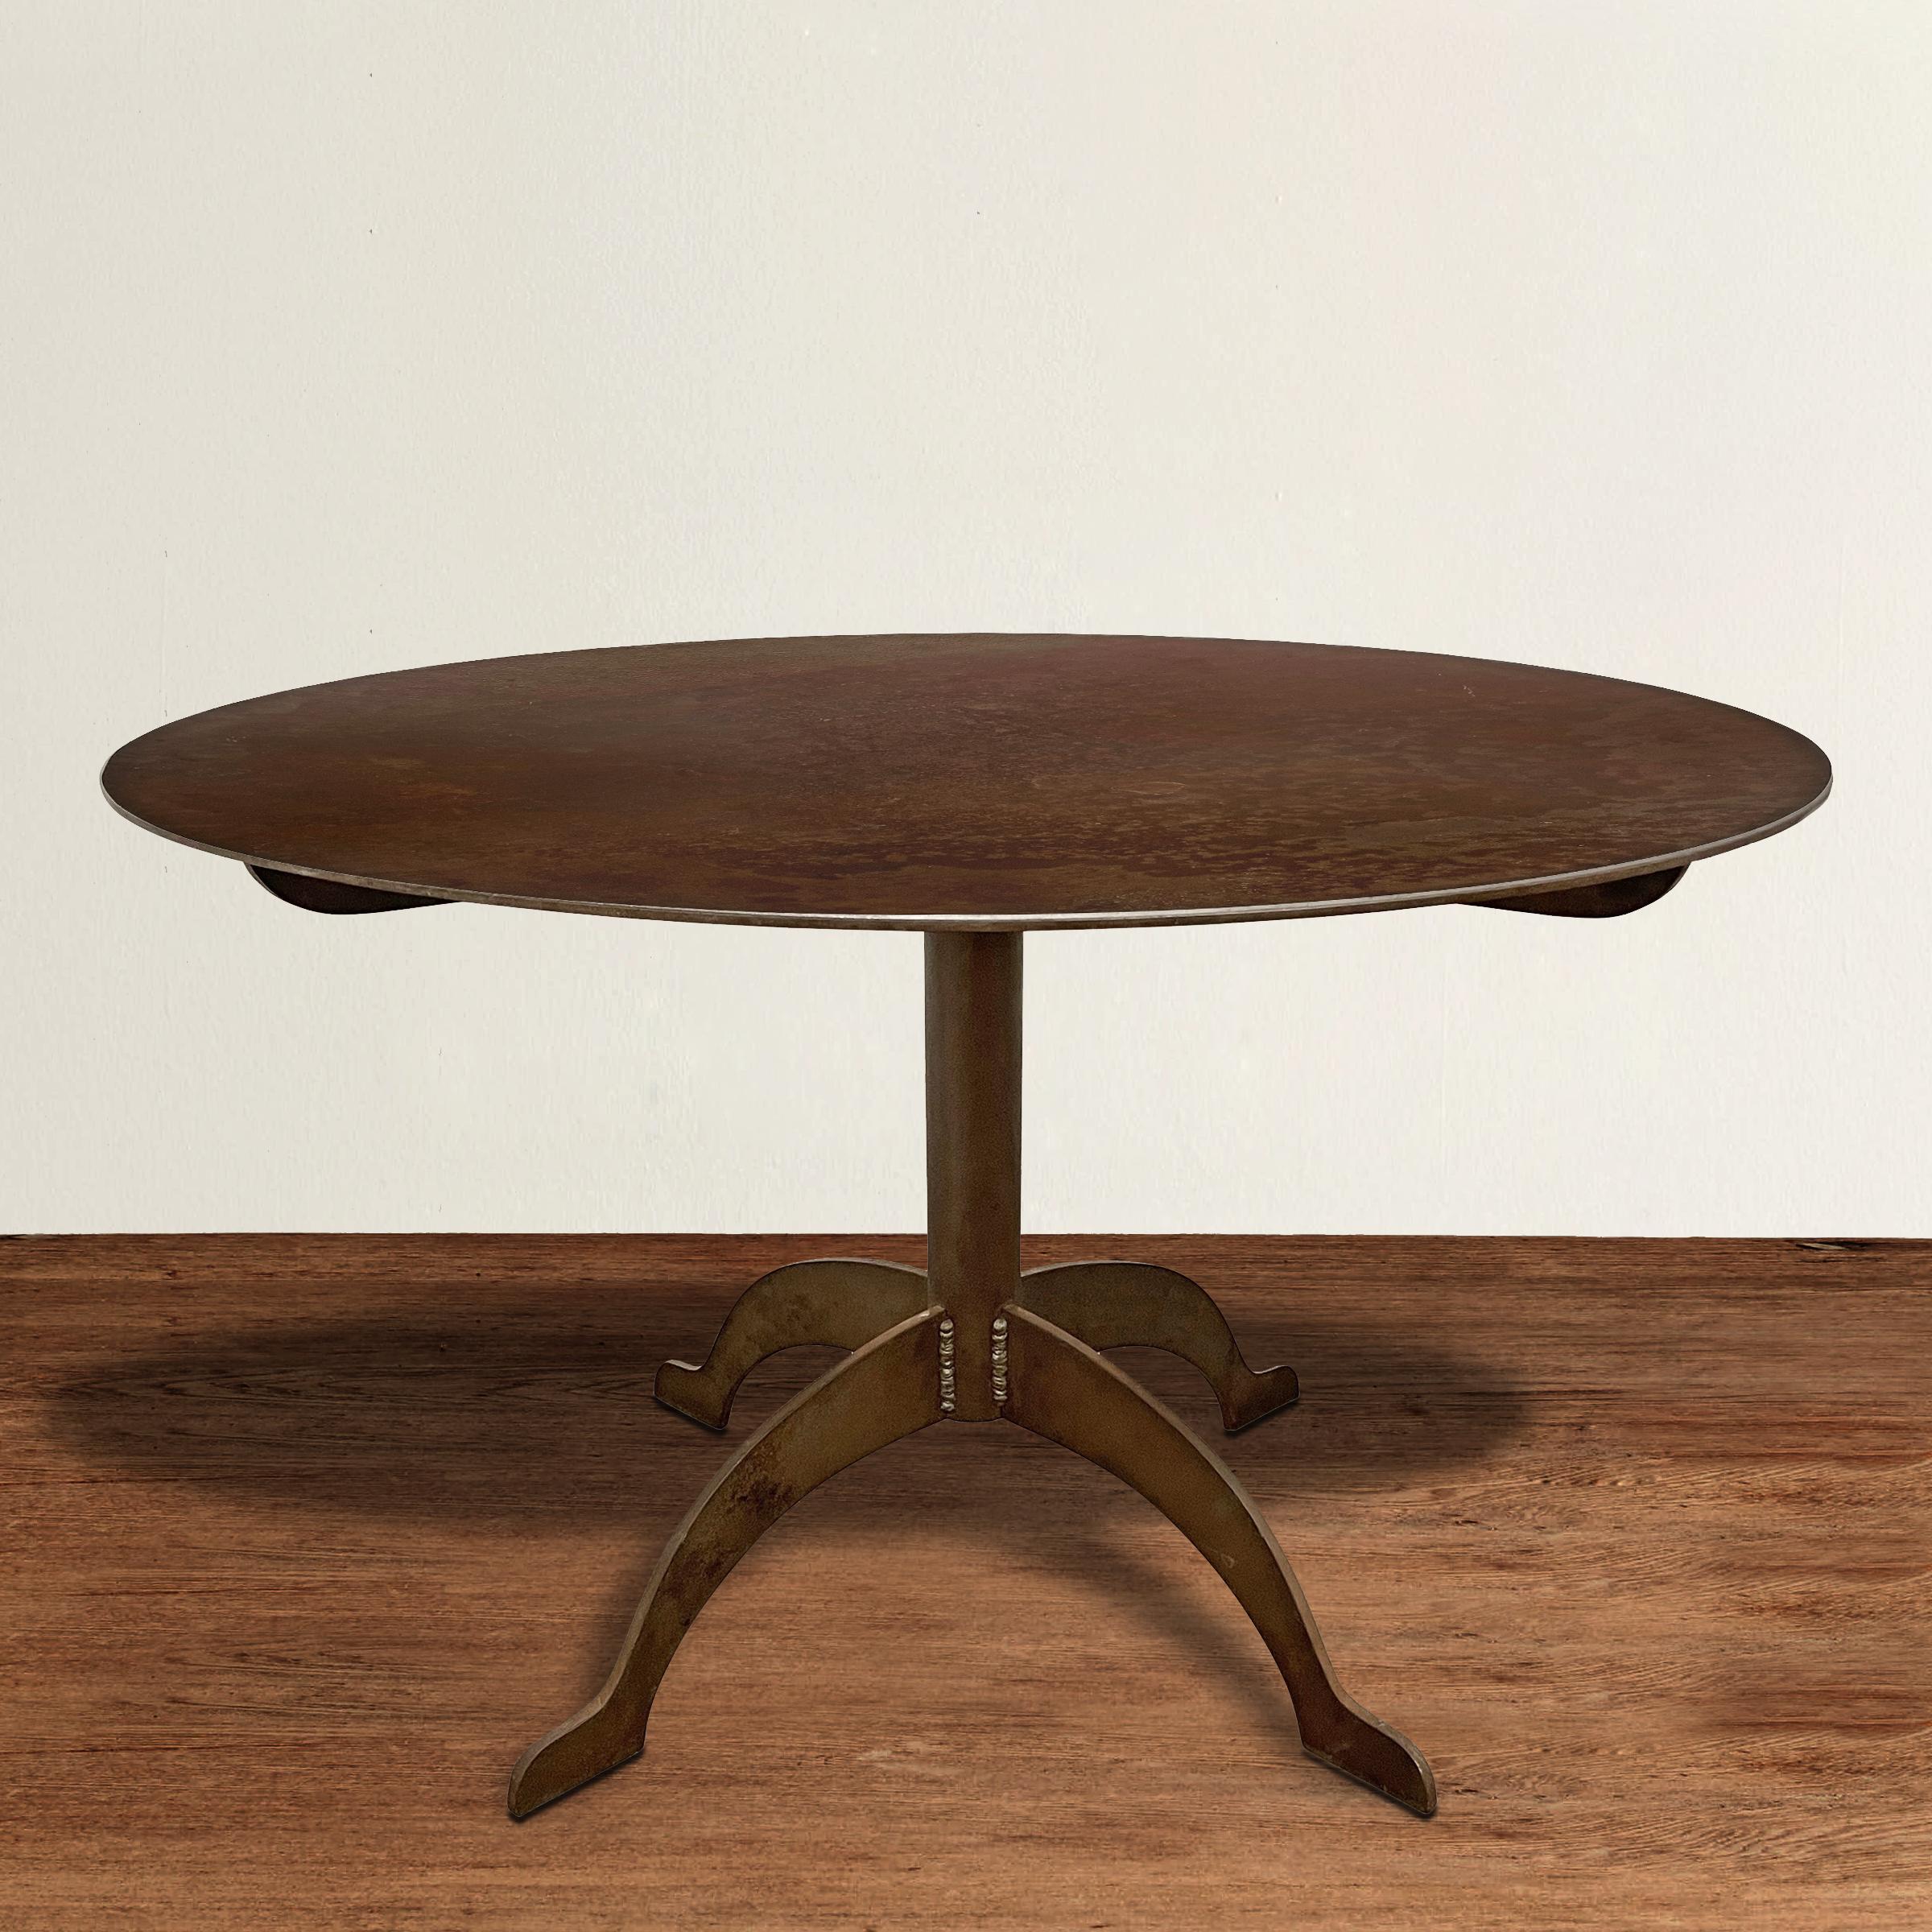 An incredible artist-made steel round dining table oozing Shaker design principles of honesty, utility, and simplicity, with four gently curved legs with pad feet in profile, and an outstanding overall naturally rusted finish. Top comes off for easy